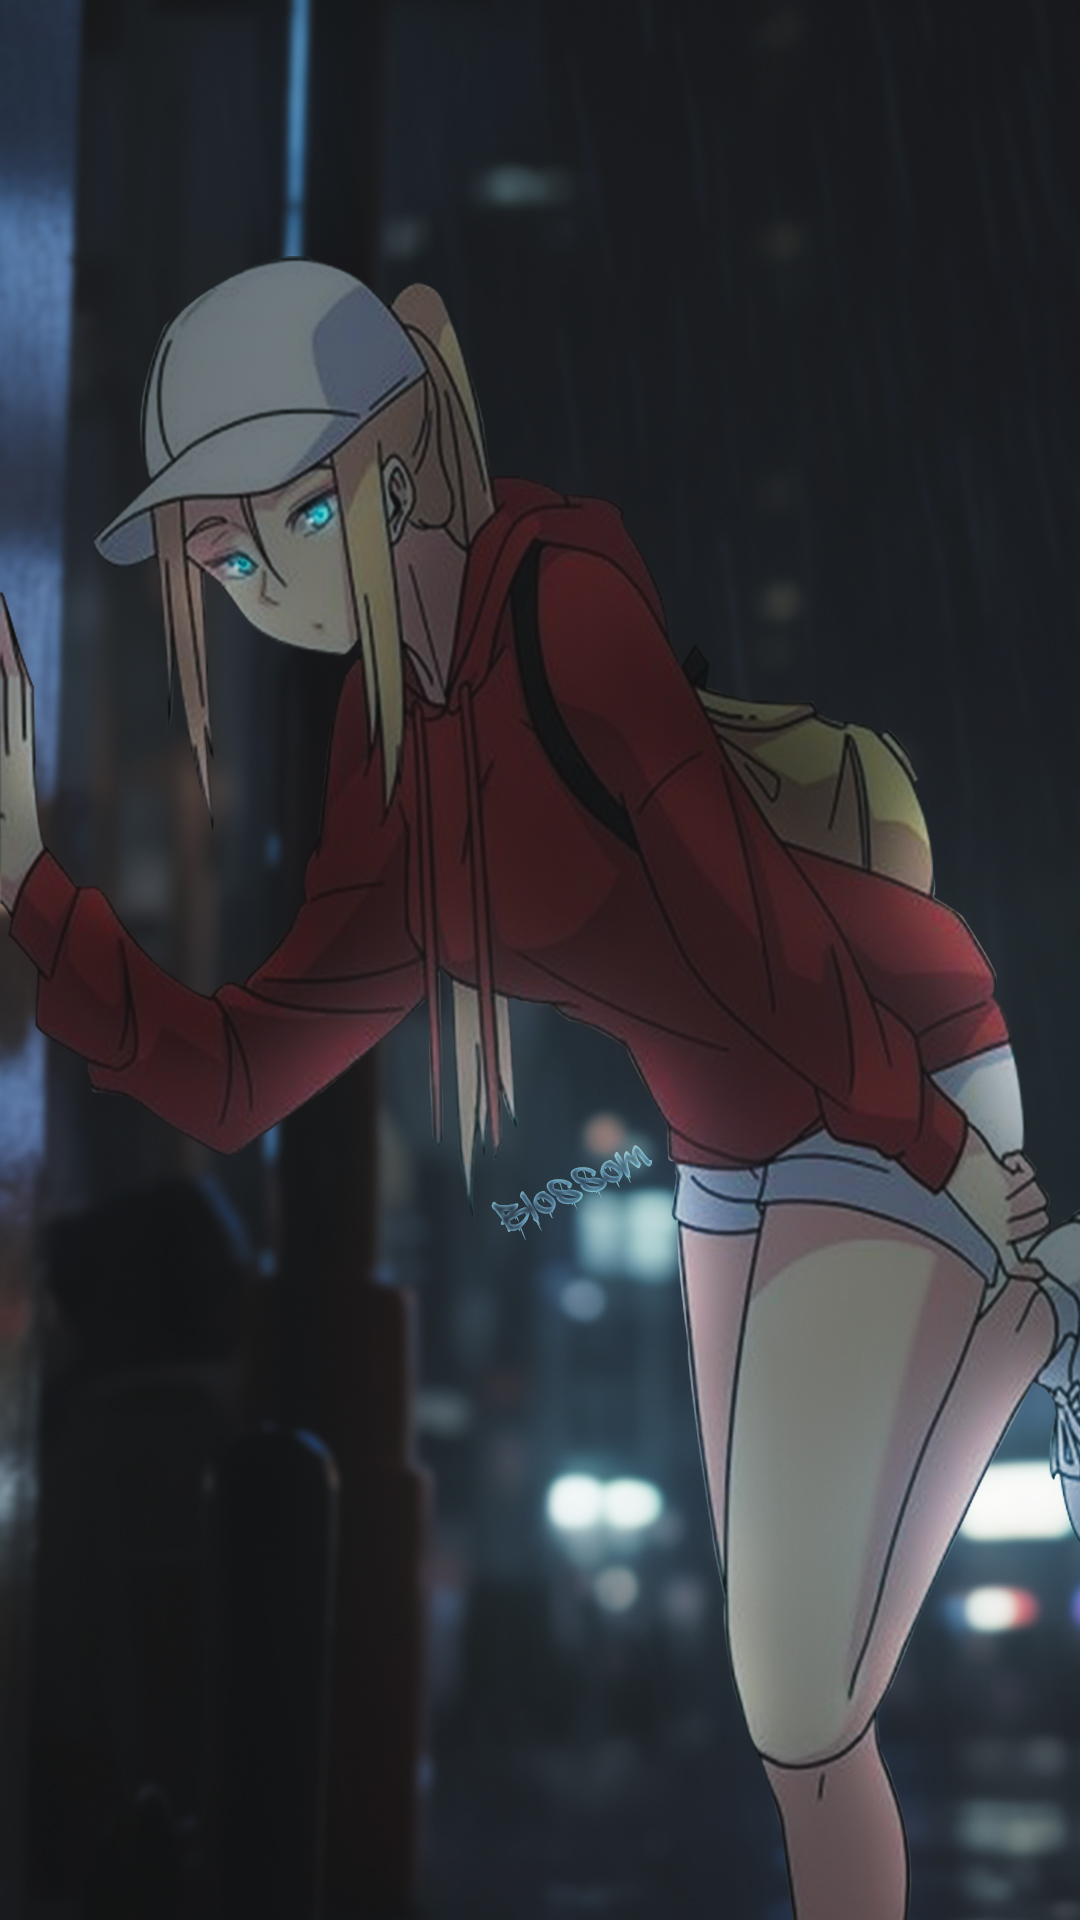 Anime 1080x1920 anime anime girls manga Japan street portrait display hat women with hats hair between eyes blonde leaning jean shorts backpacks red jackets jacket long sleeves standing city lights blue eyes ponytail legs